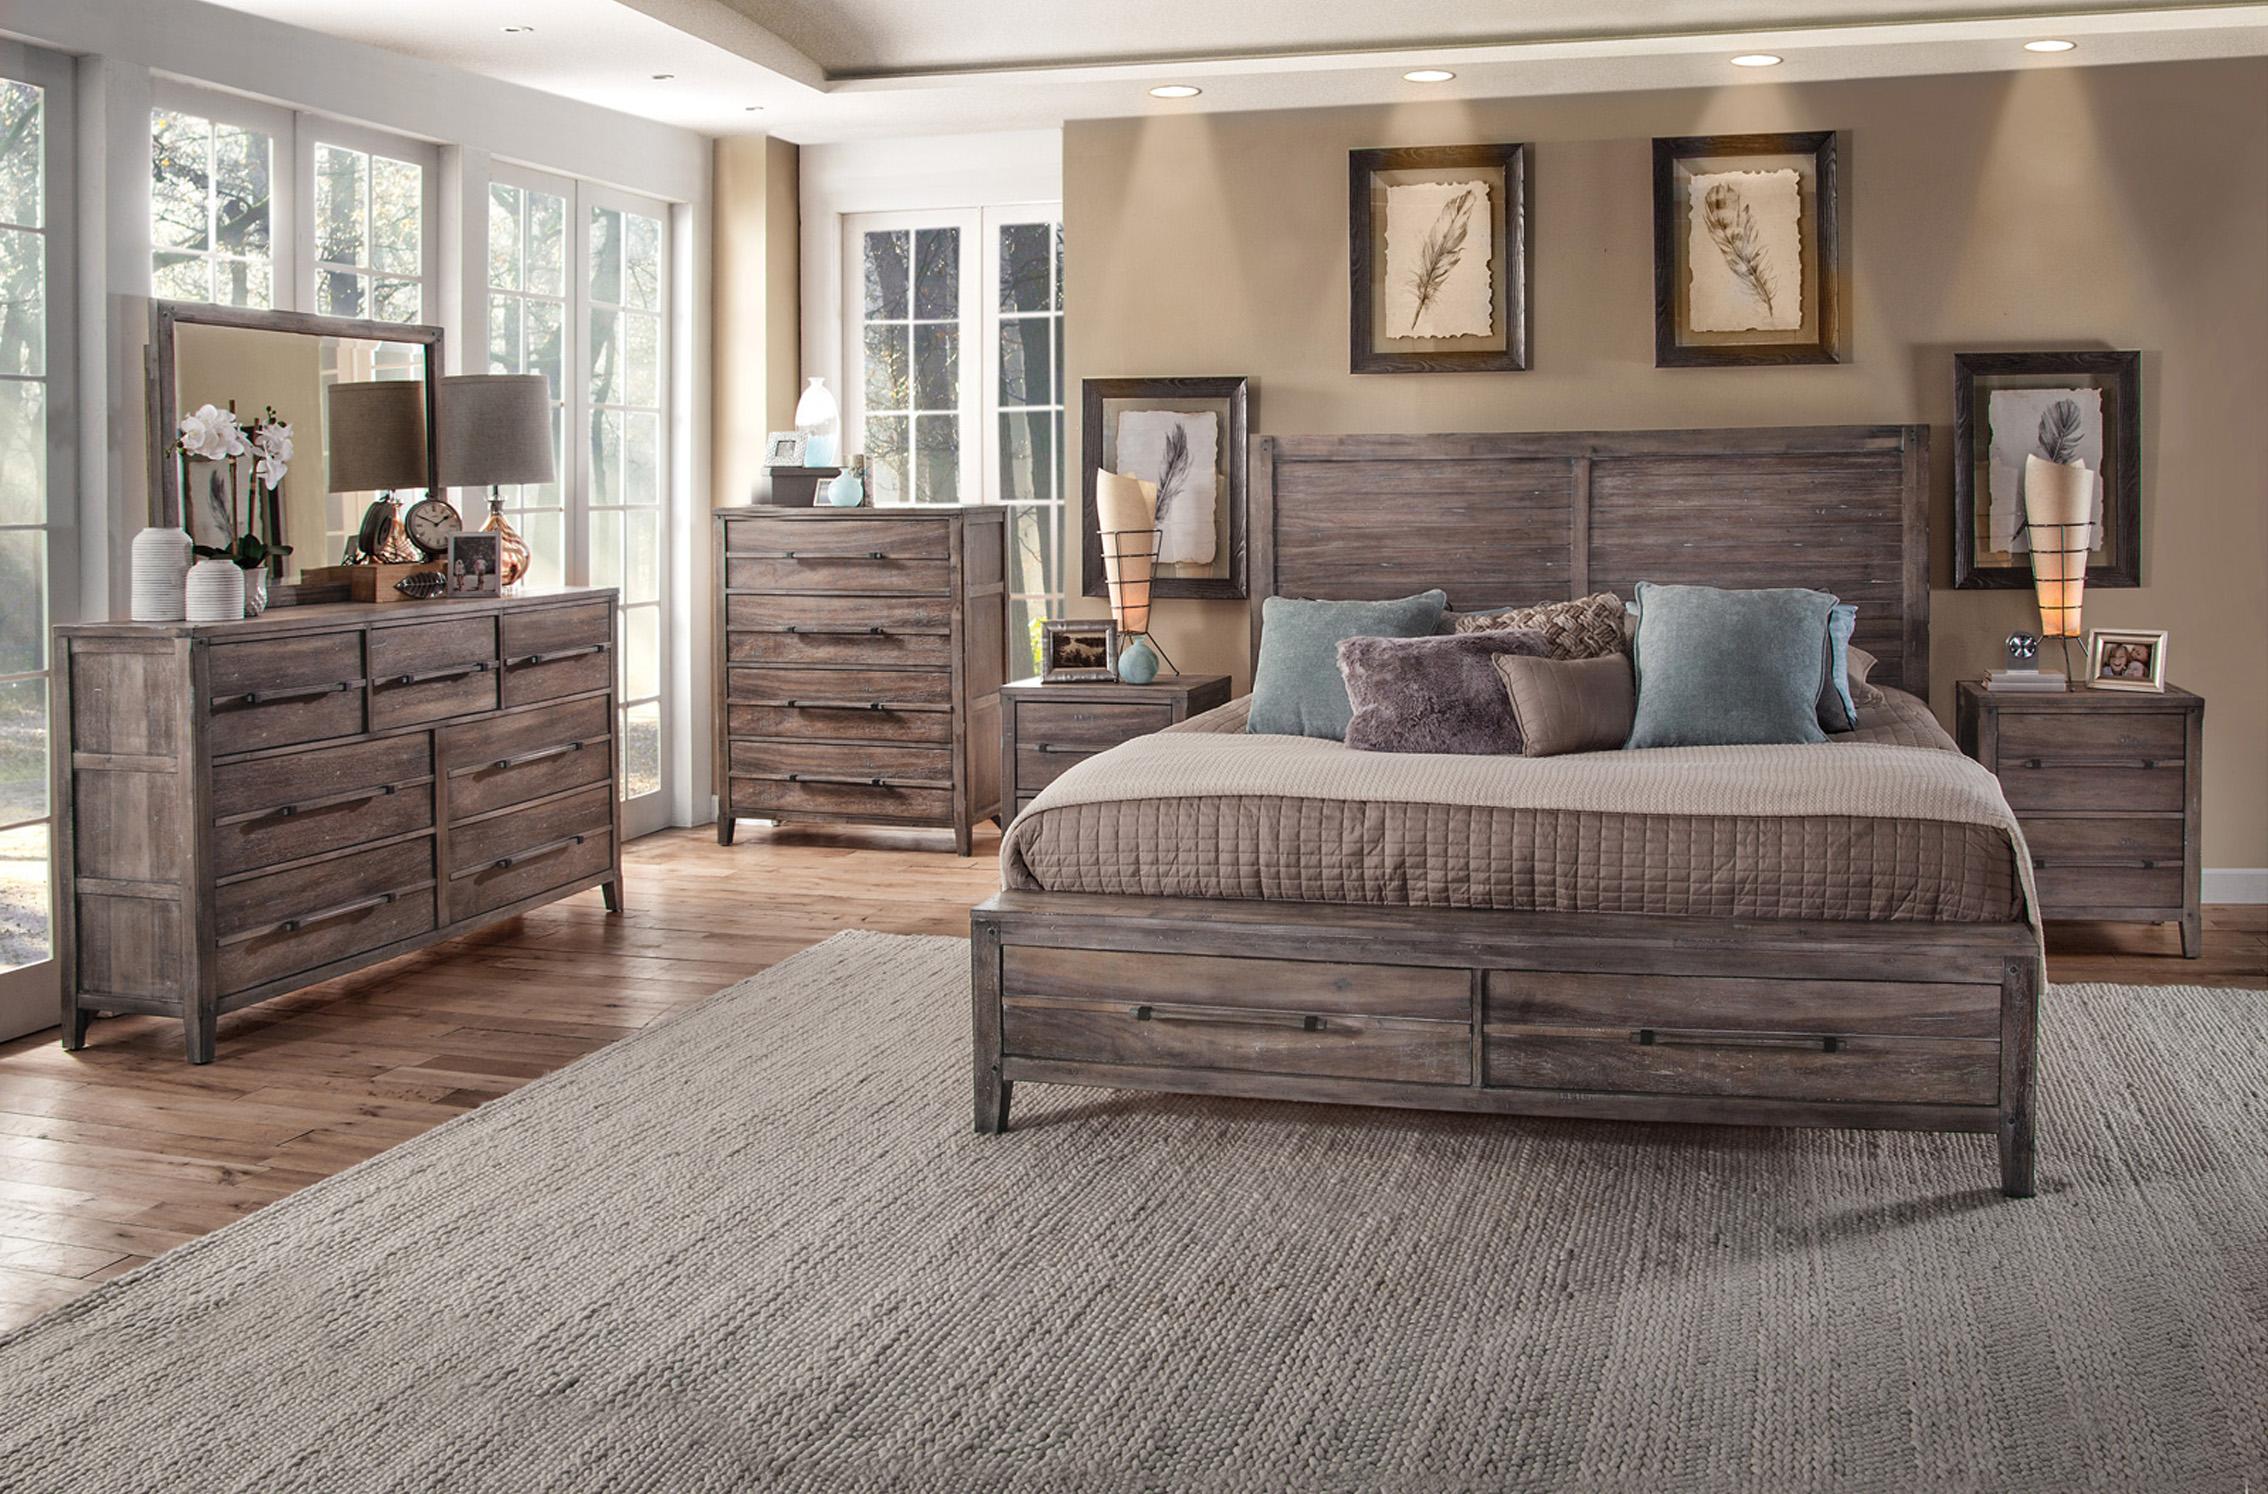 Classic, Traditional Panel Bedroom Set AURORA 2800-66PNST 2800-66PNST-2NDM-5PC in Driftwood, Gray 